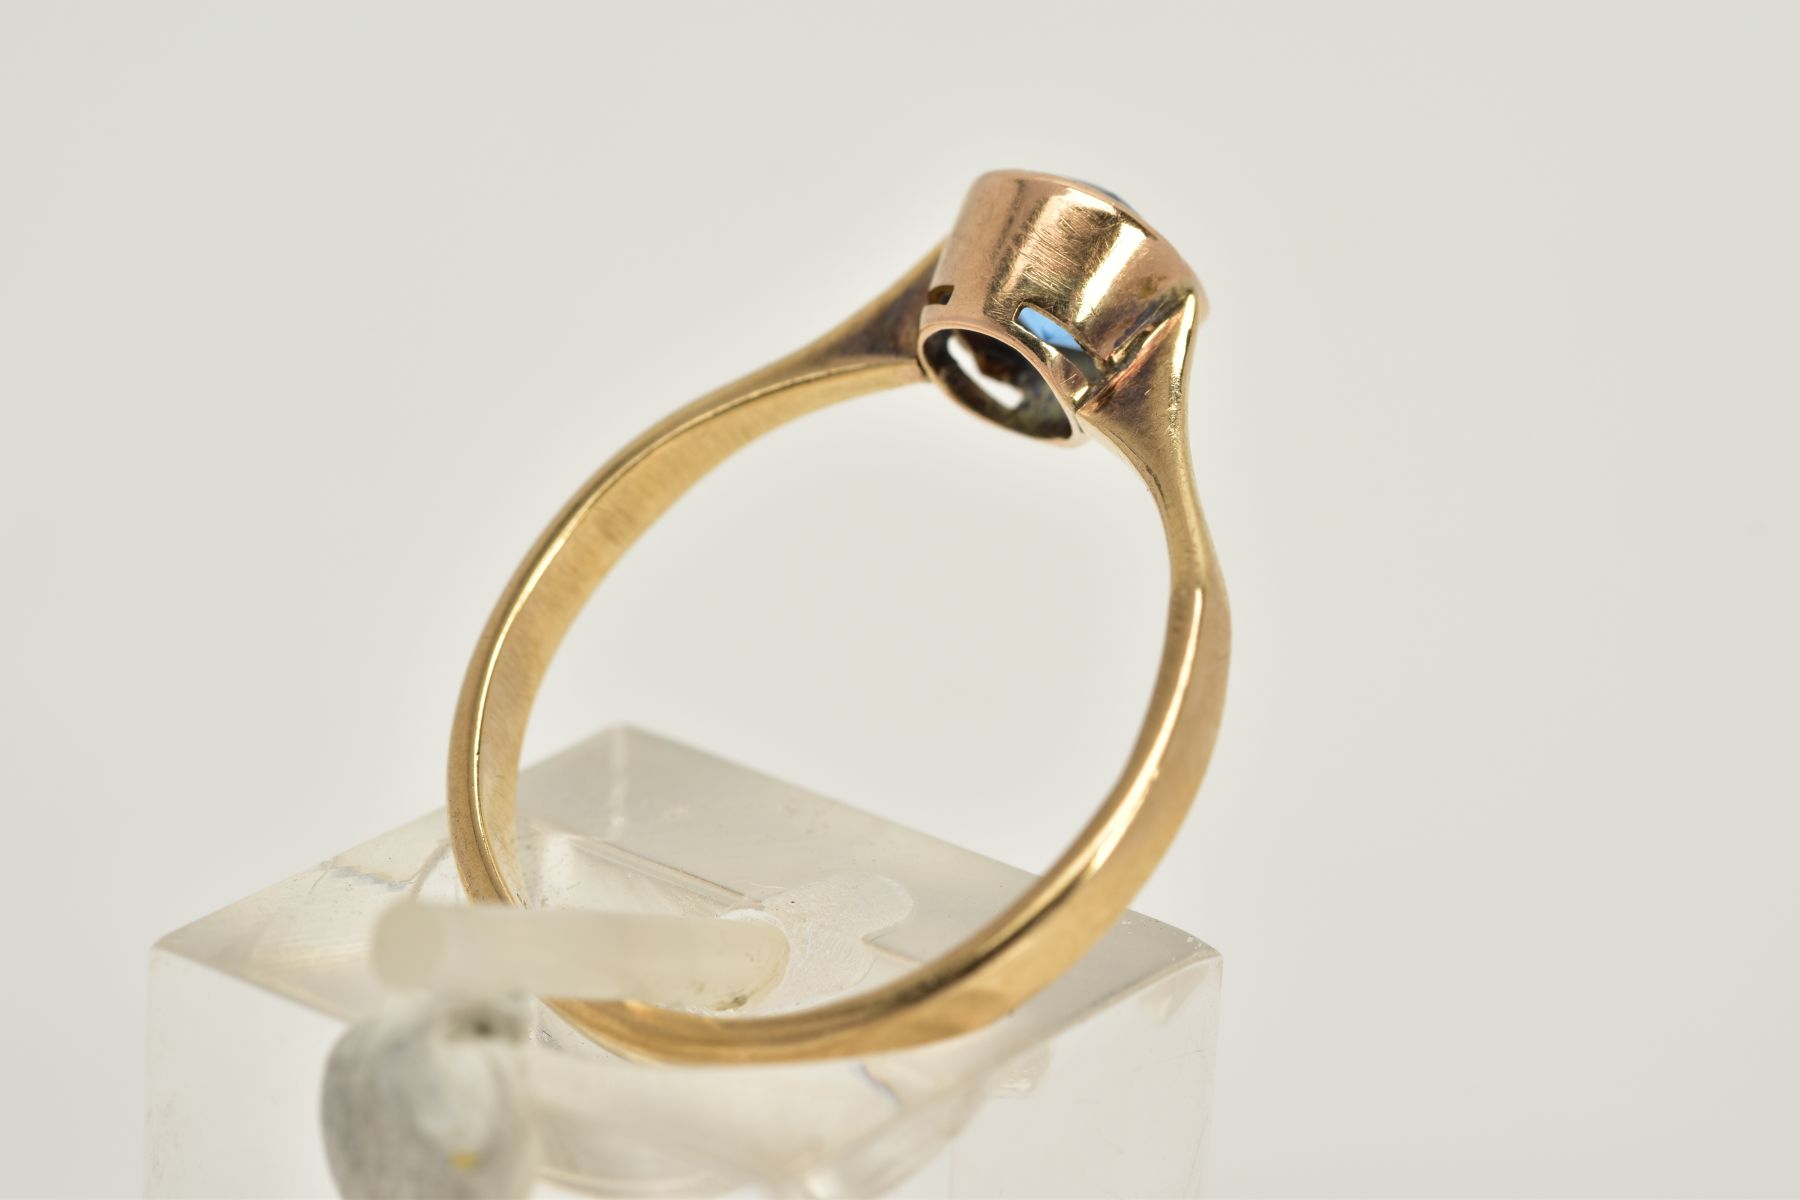 A YELLOW METAL GEM SET RING, set with a circular cut blue stone assessed as paste, tapered - Image 3 of 3